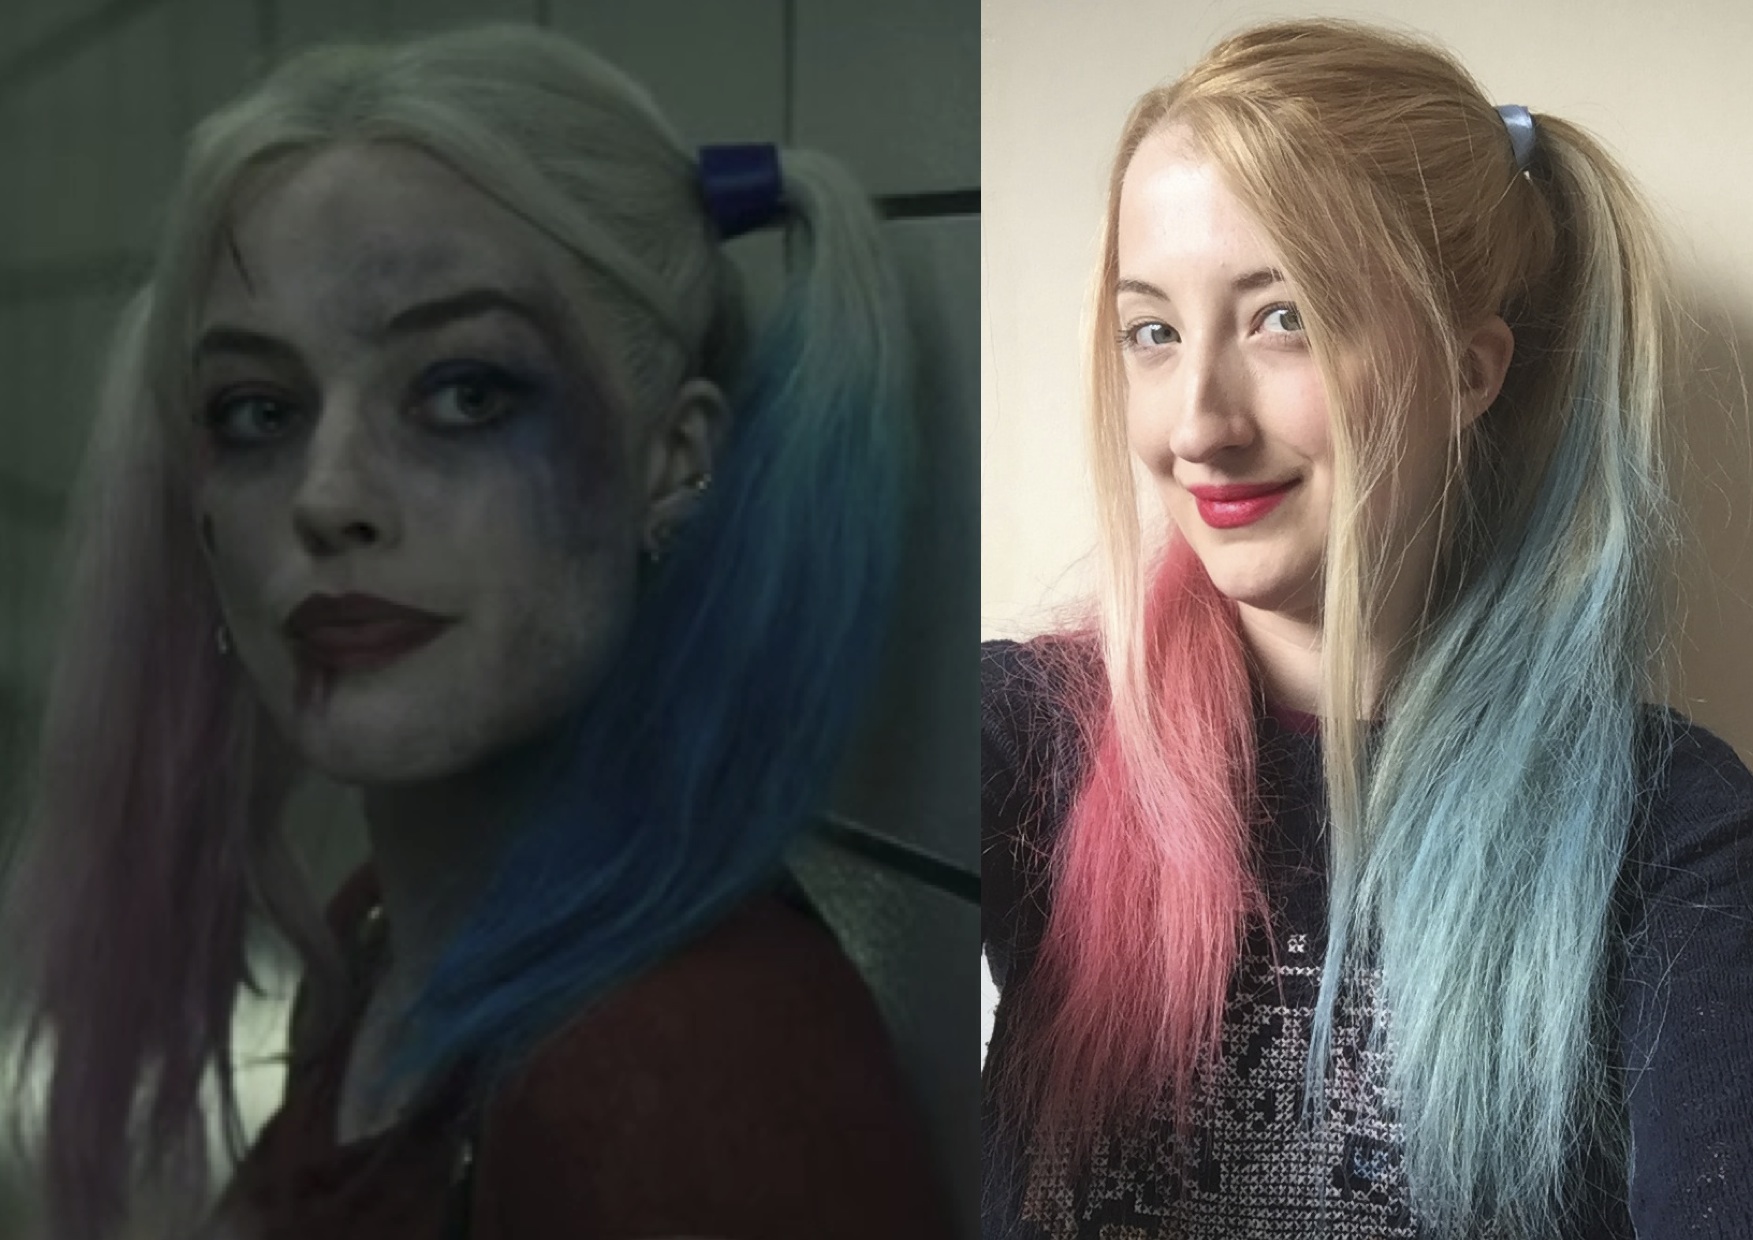 DIY Harley Quinn Suicide Squad Hair In 7 Simple Steps For Looks